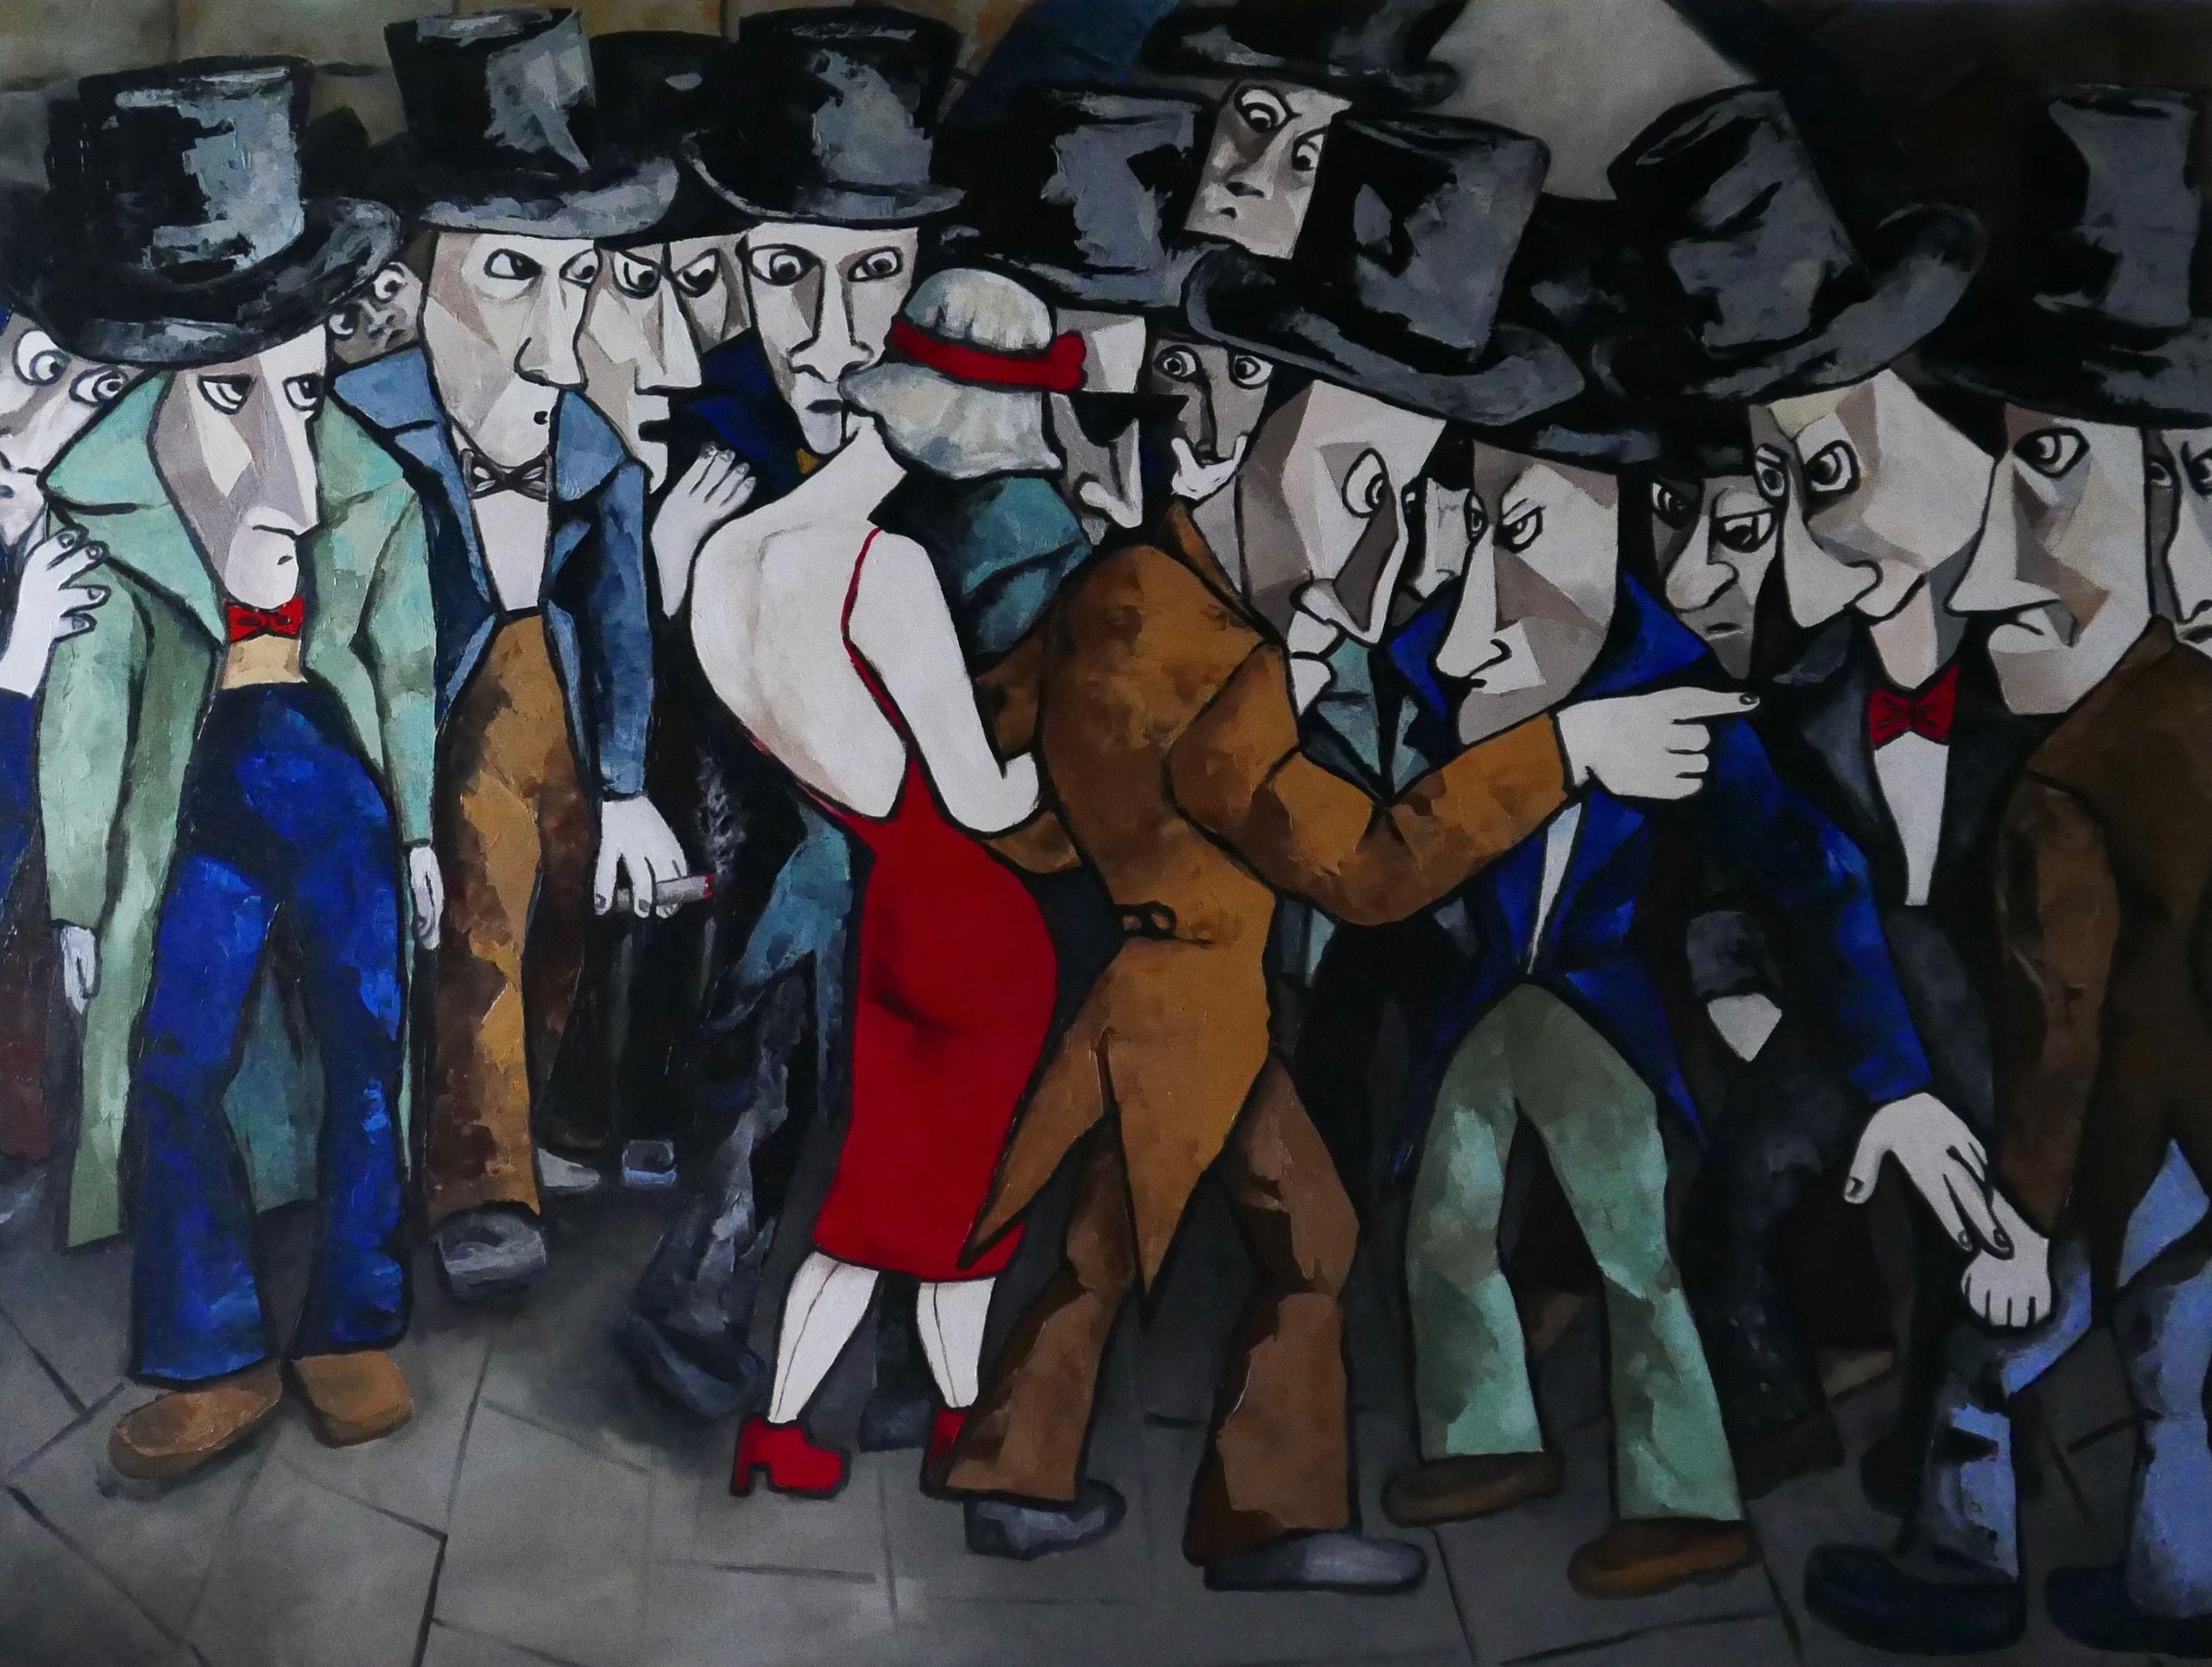 Menacing top hats jostle for a glimpse of the backless beauty, vulnerability in red faces the grey threat of a sinister crowd. A disquieting street, a hostile world.    A large oil painting painted mainly with a palette knife of the Top hat & tails